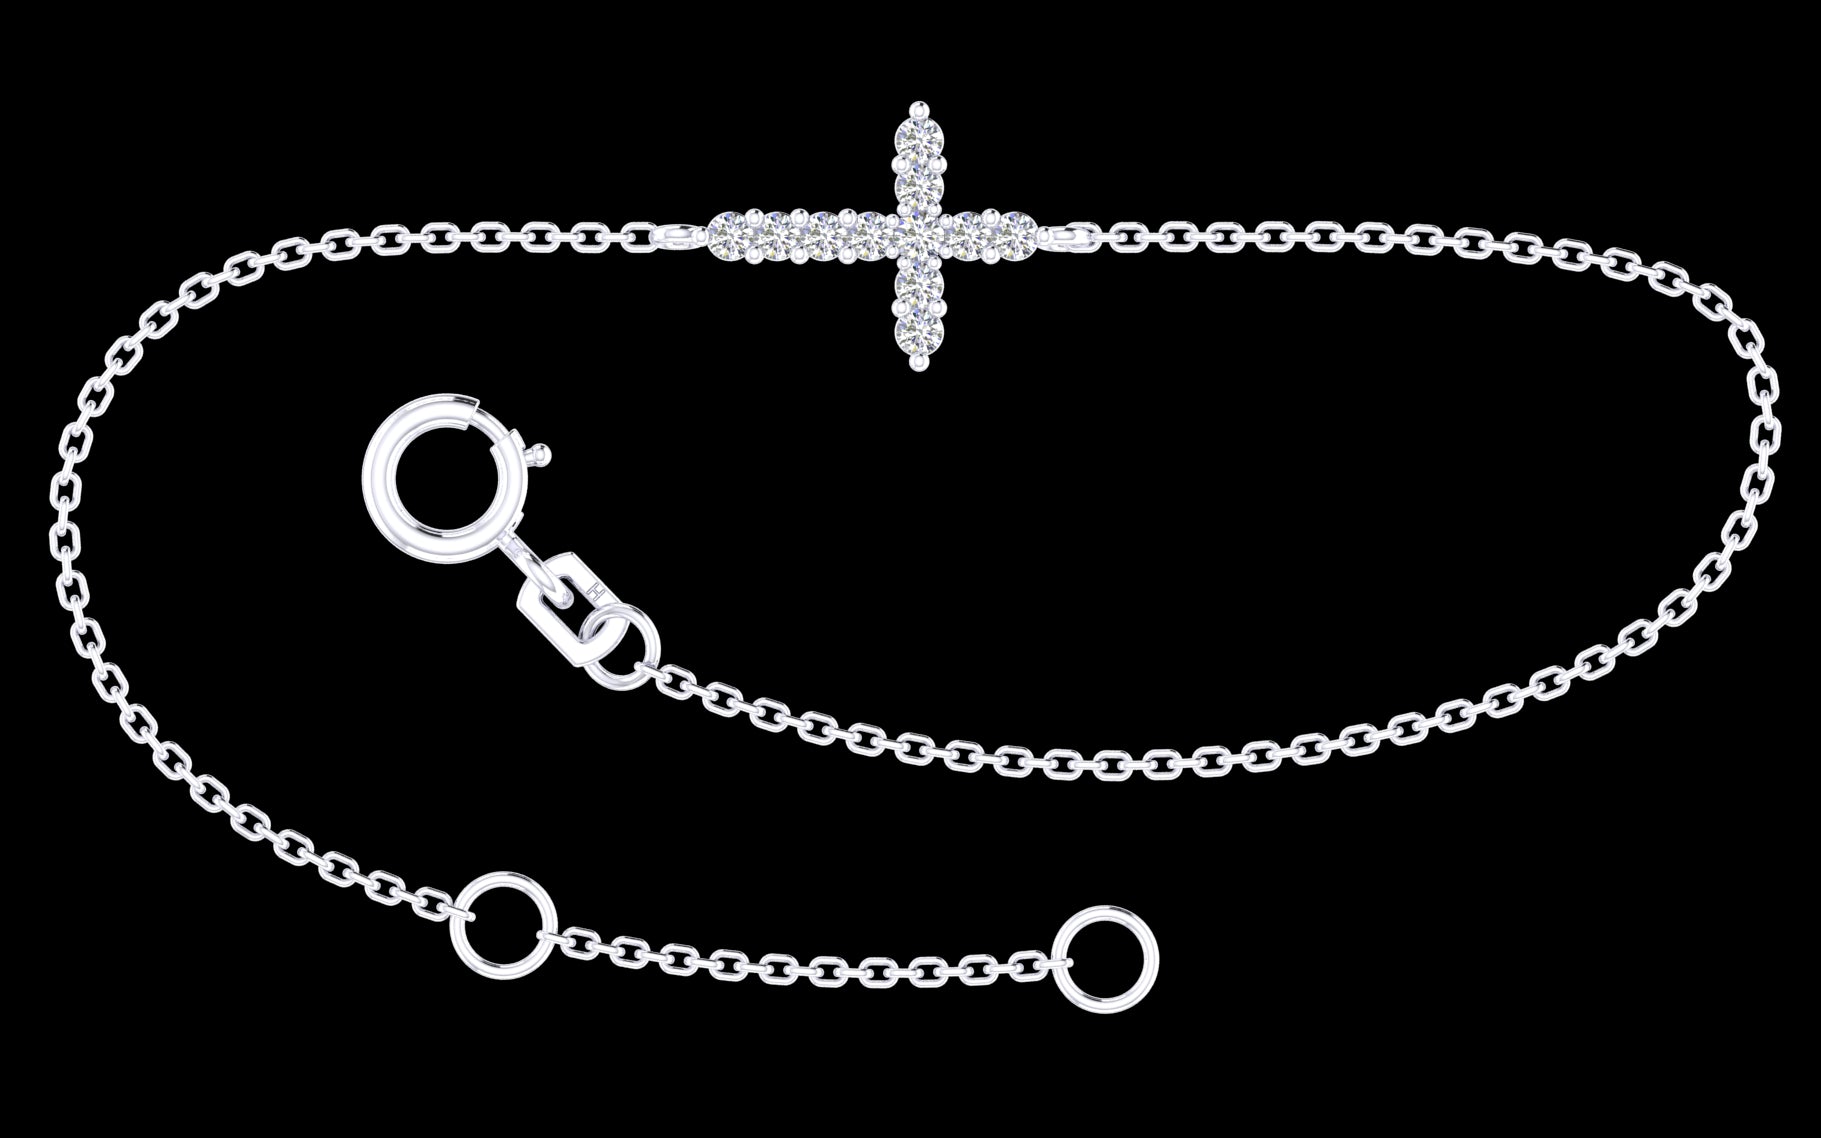 9k WG Oval link Bracelet with Diamond Cross. 19cm with Jump ring at 17cm. 11D=0.15ct